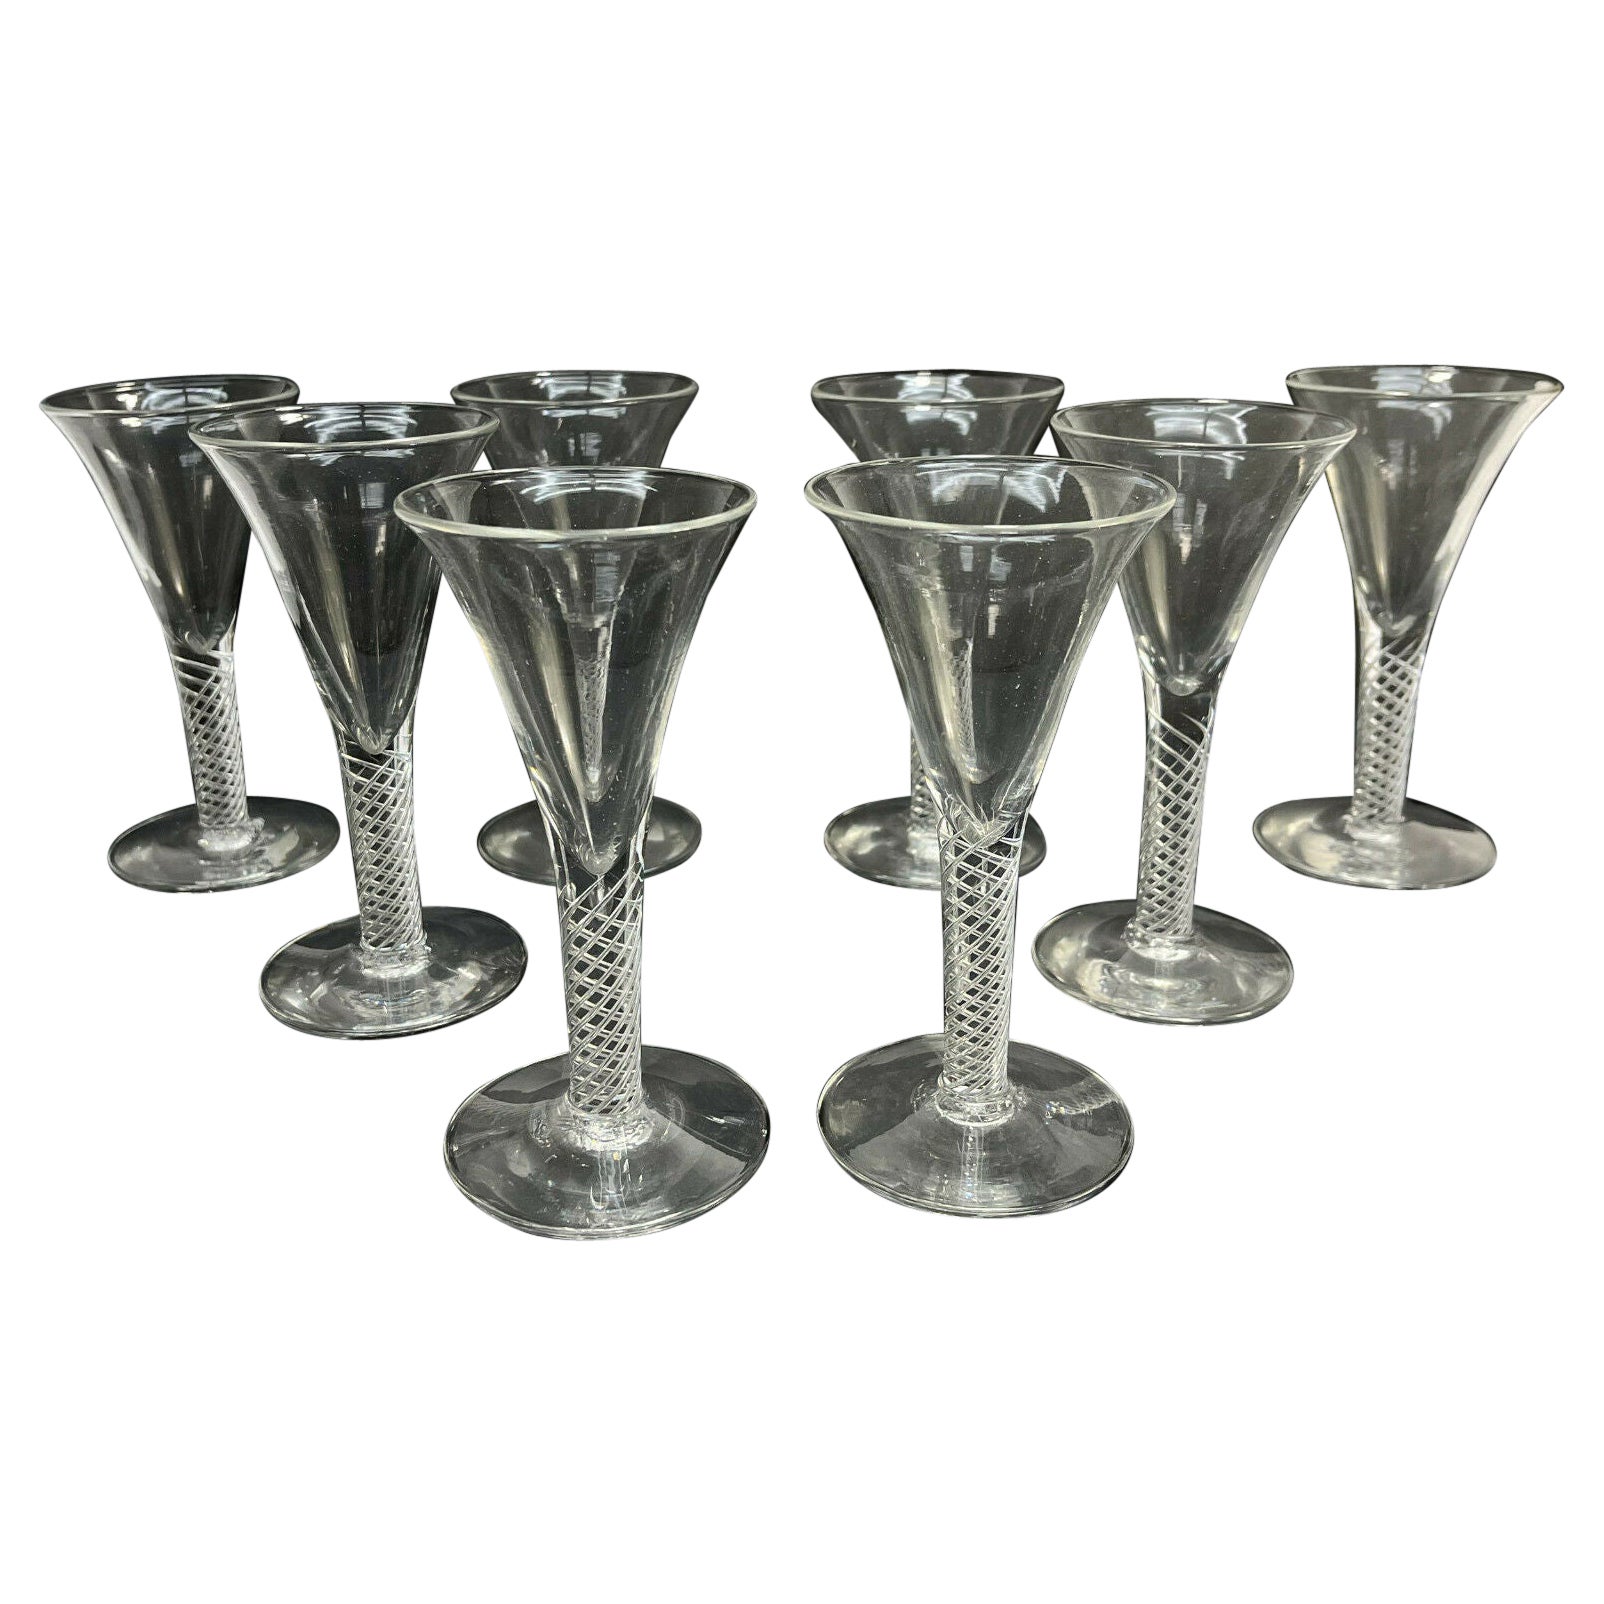 Set of 8 English Striation Air Twist Stem Wine Goblets, 19th Century or Earlier For Sale